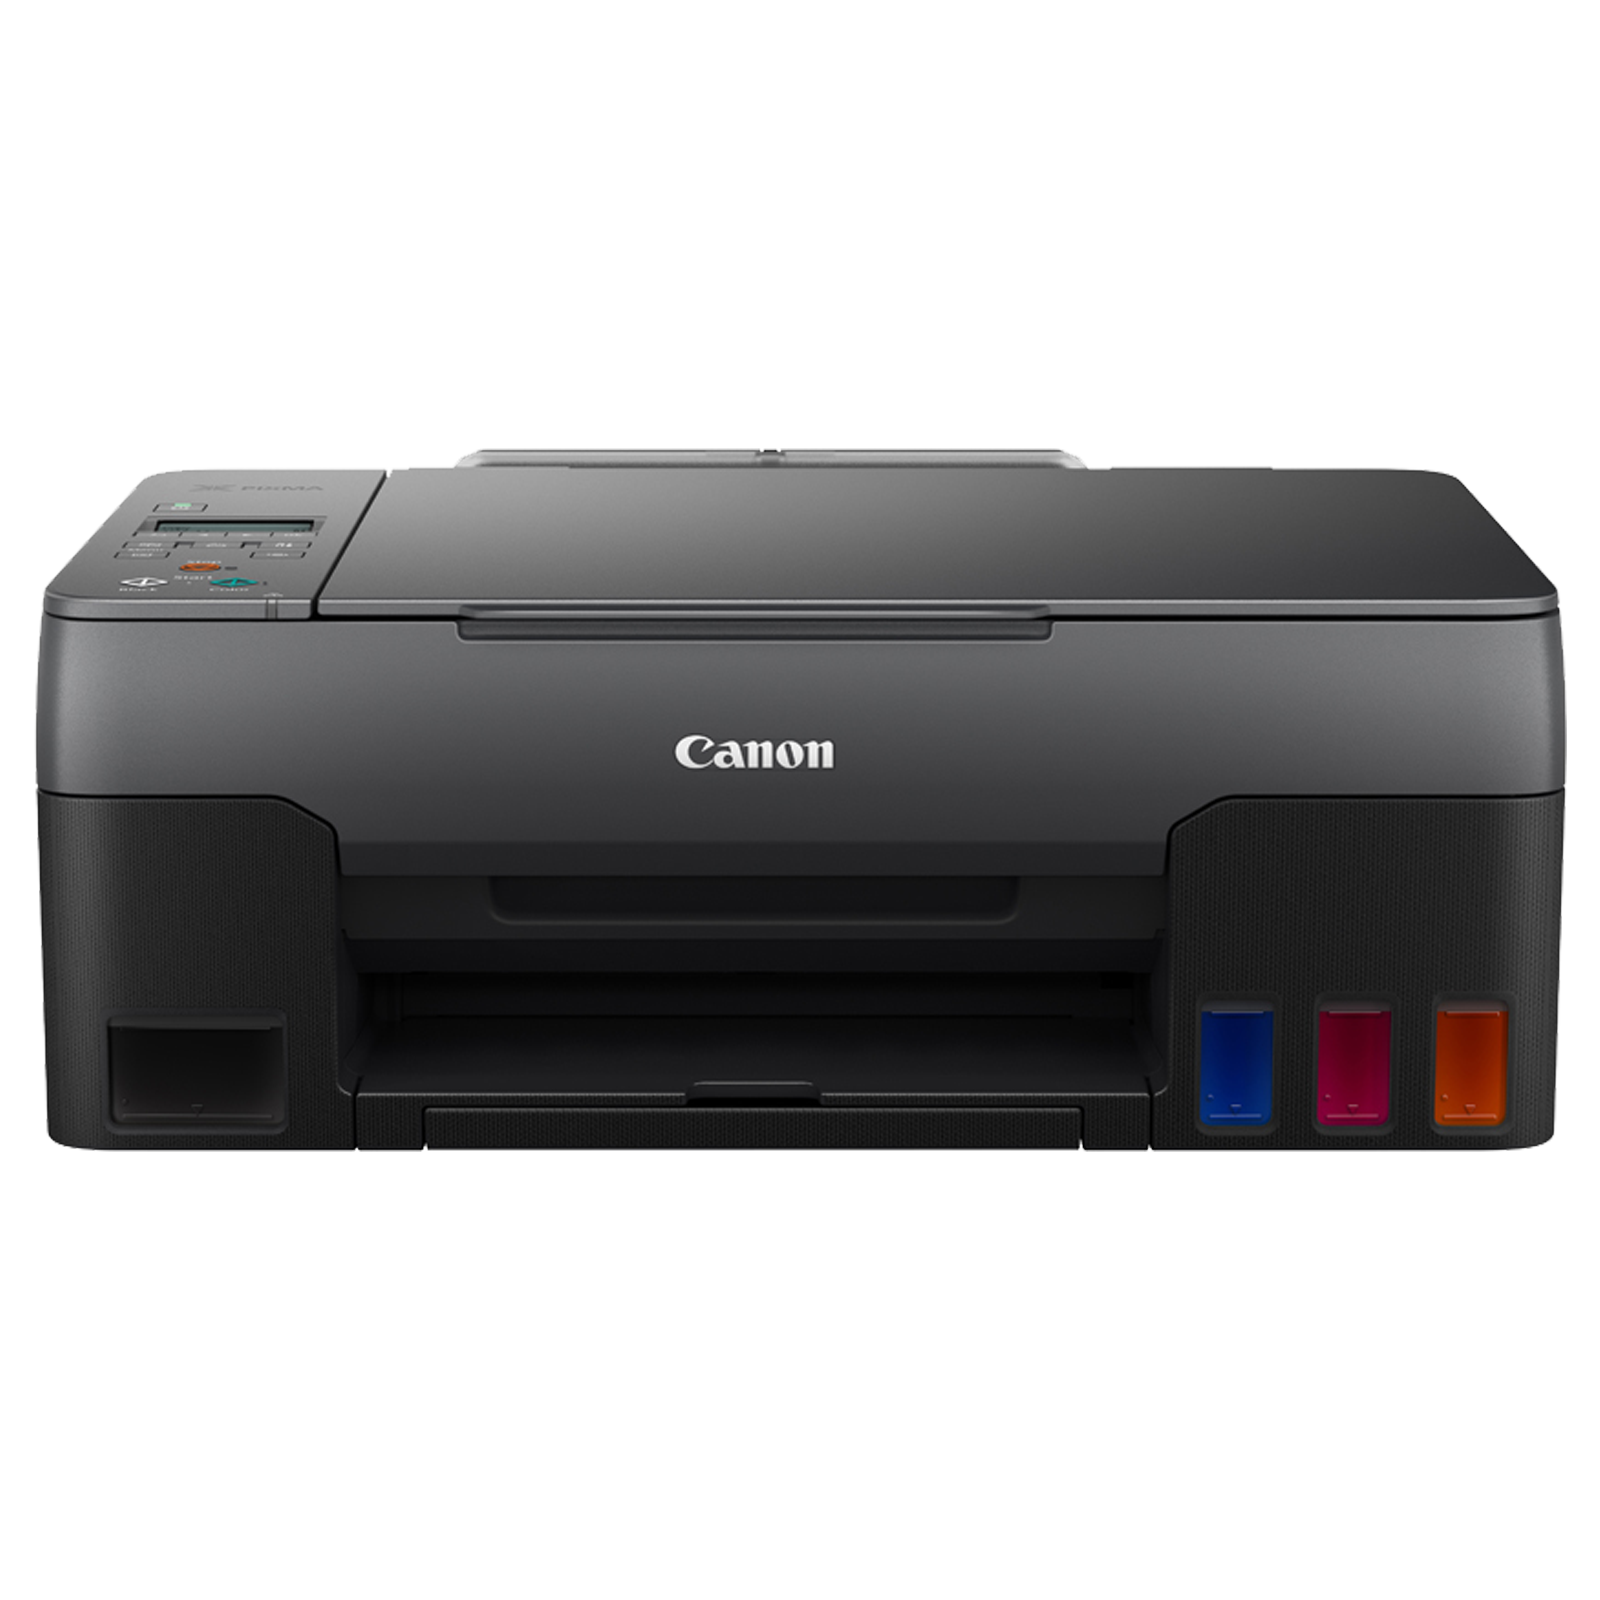 Canon Pixma G3020MF Wireless Color All-in-One Ink Tank Printer (Borderless Printing, 4467C018AG, Black)